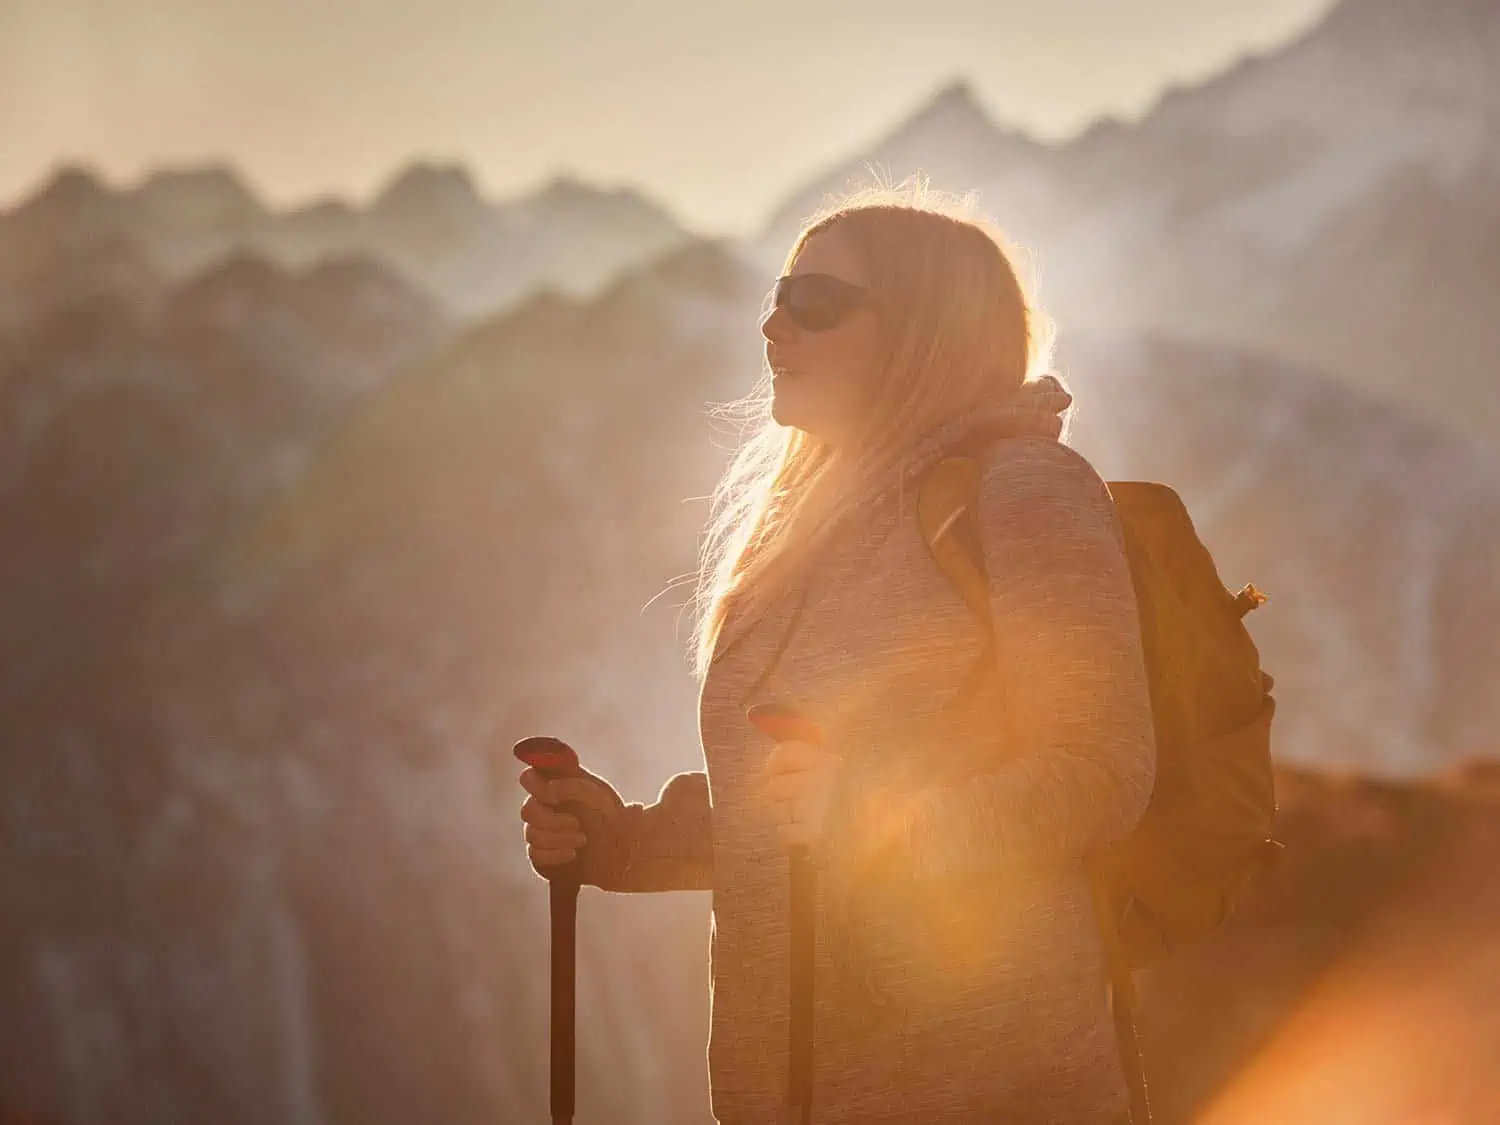 Person wearing grey hoody, yellow bag, black sunglasses with hiking sticks in low level sun with out of focus mountains in background